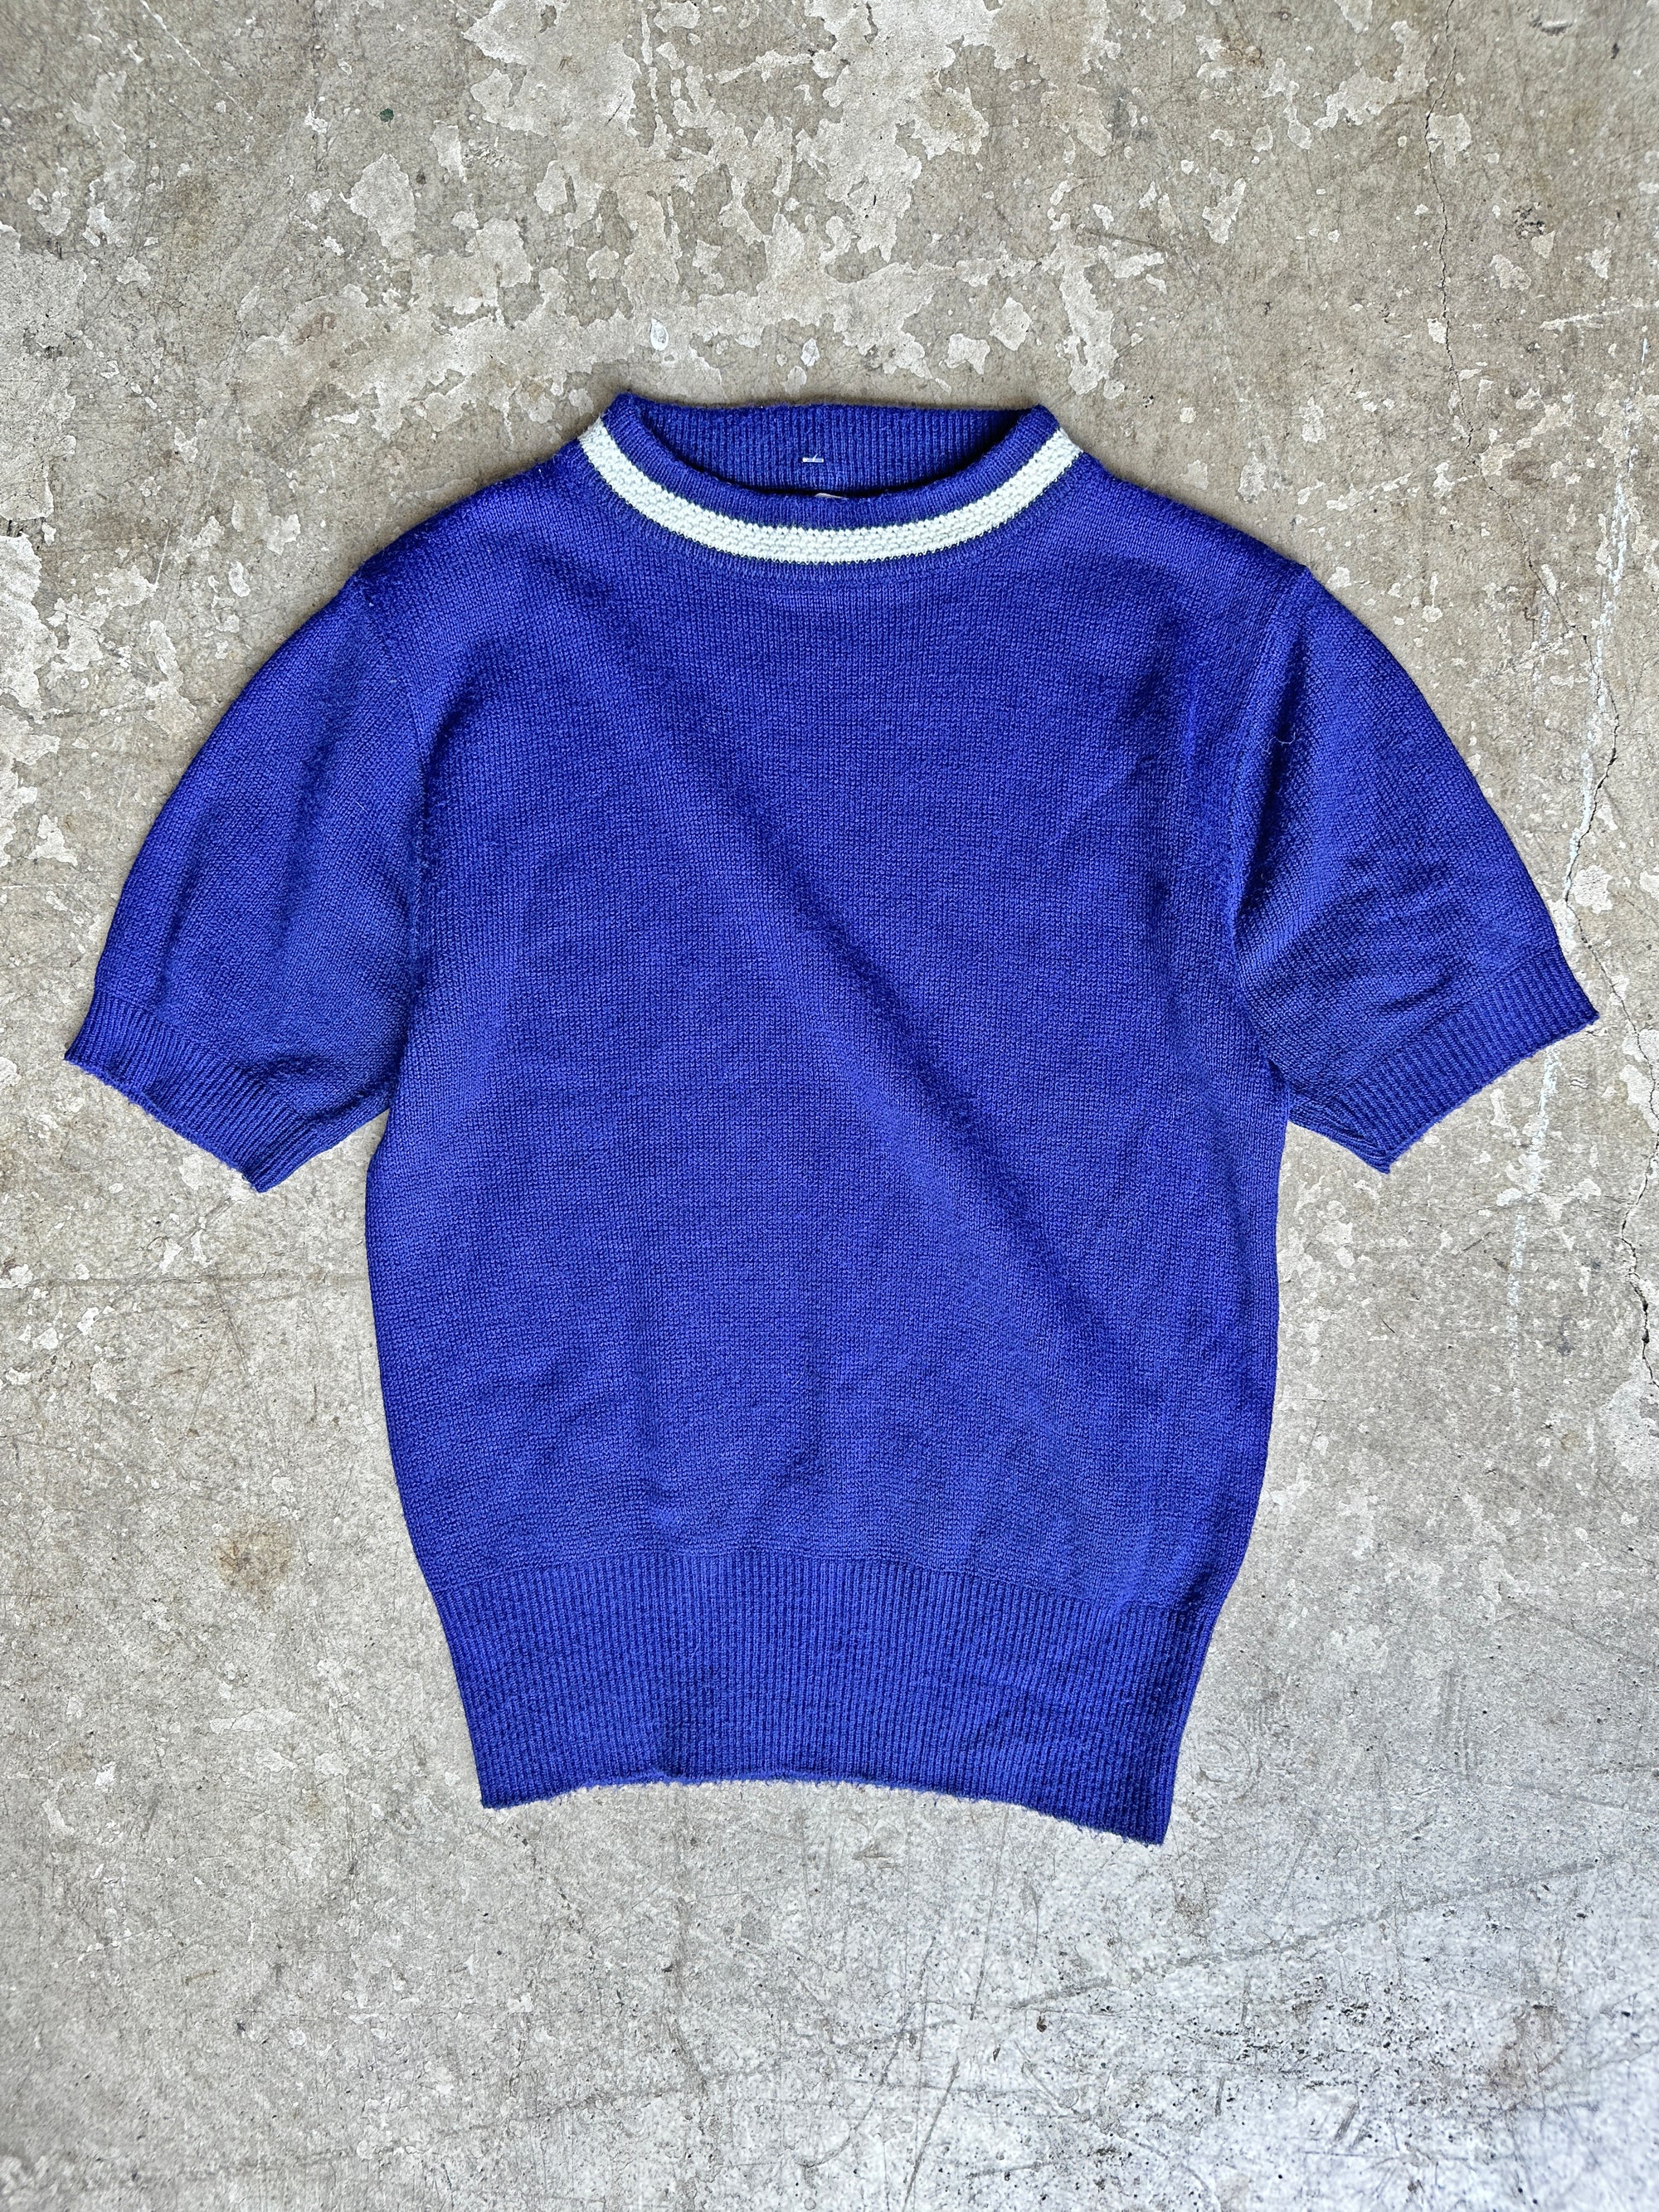 Youth Navy Sweater